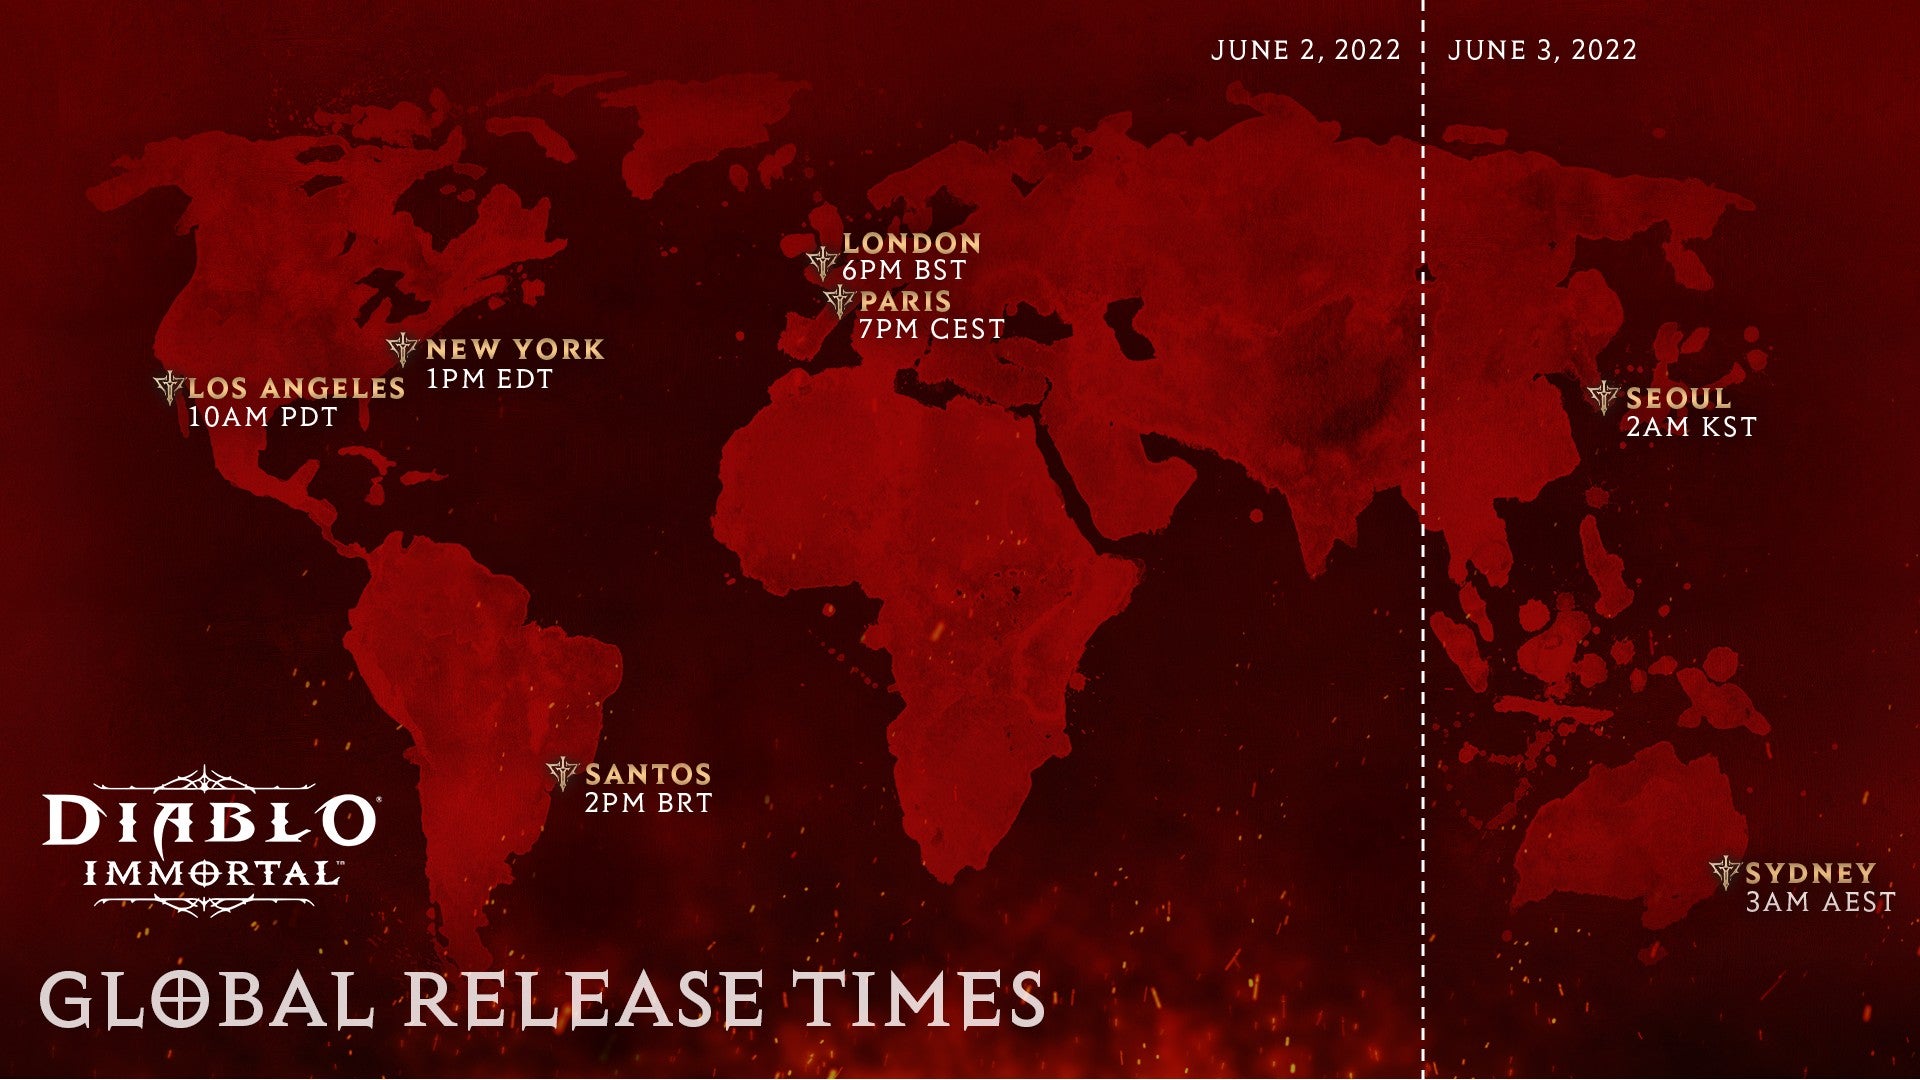 Red-tinted map of the world with Diablo Immortal release times specified for each region